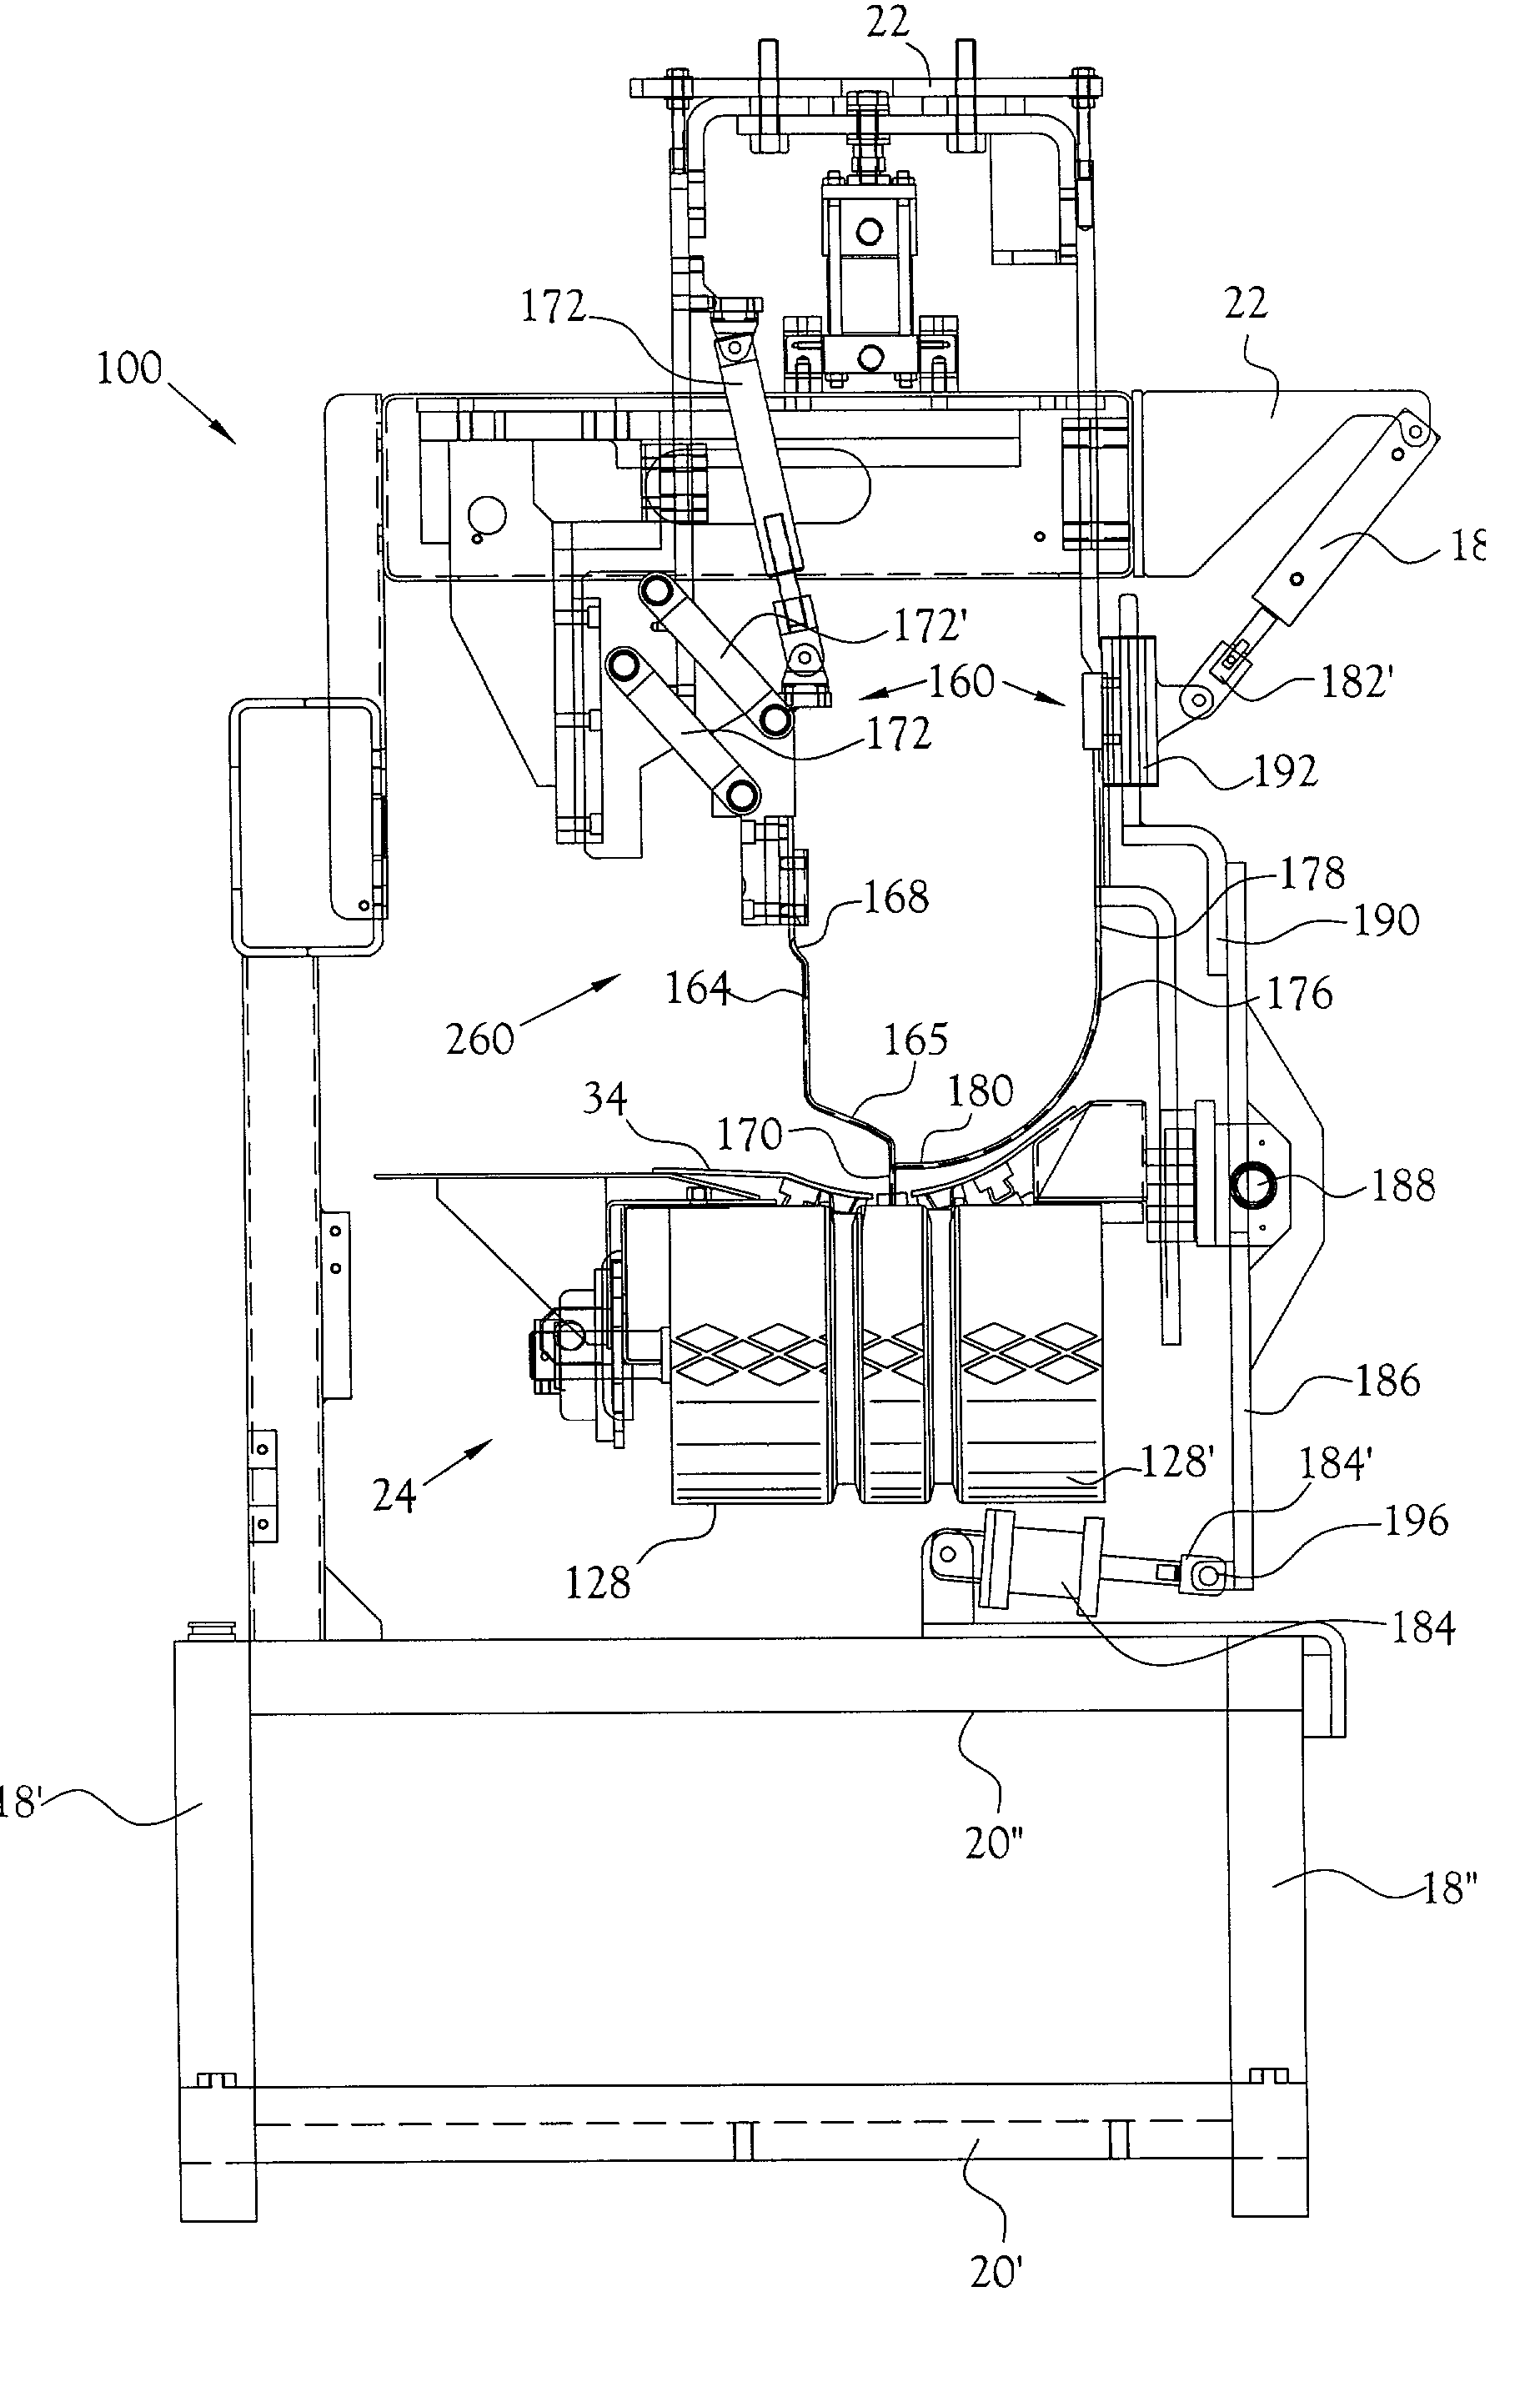 Dual blade loin knife assembly for automatic loin puller apparatus